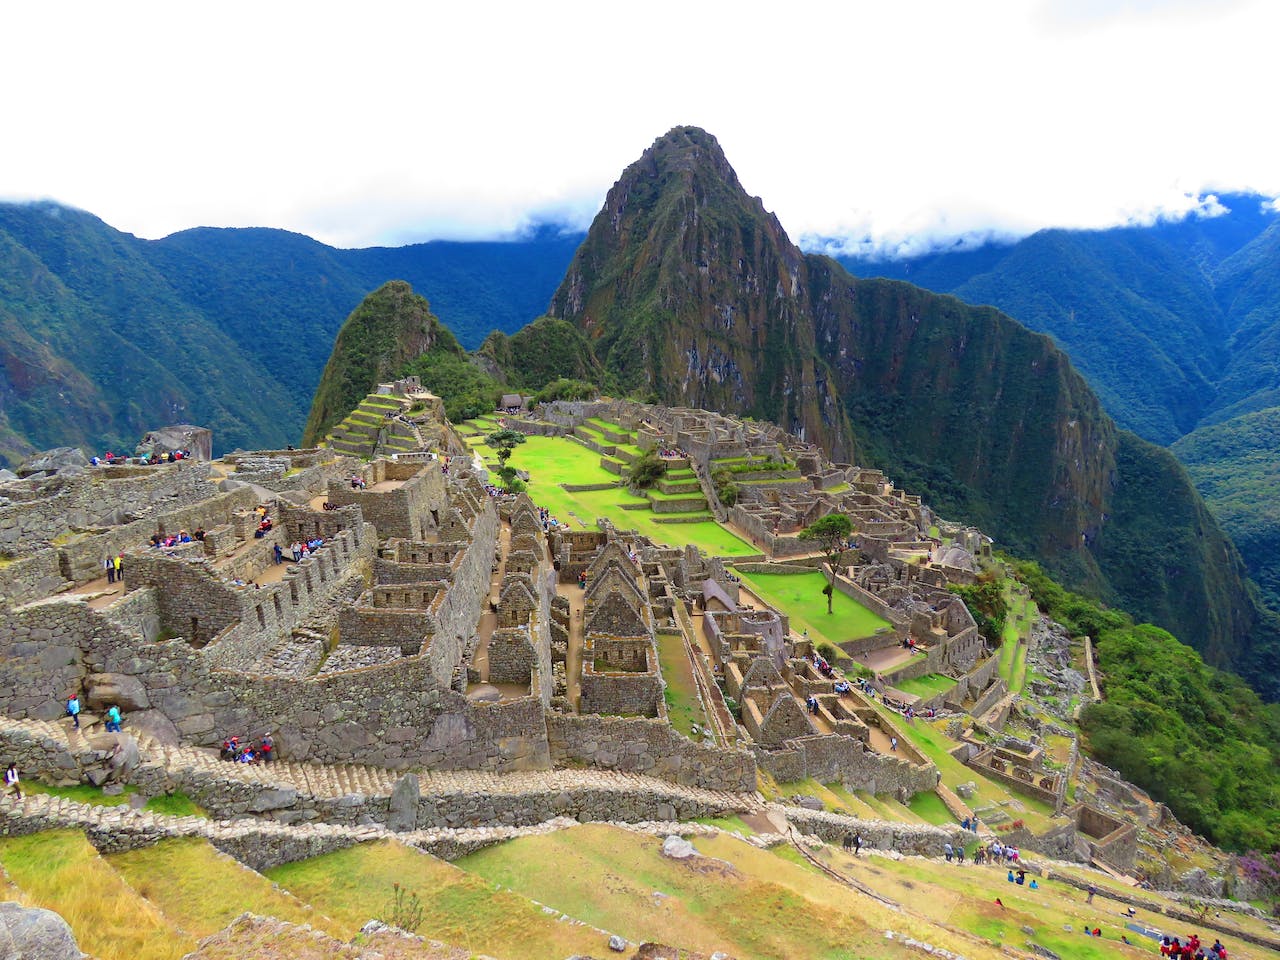 9 Machu Picchu History Facts That Lure Traveler's to Its Ruins Year Round